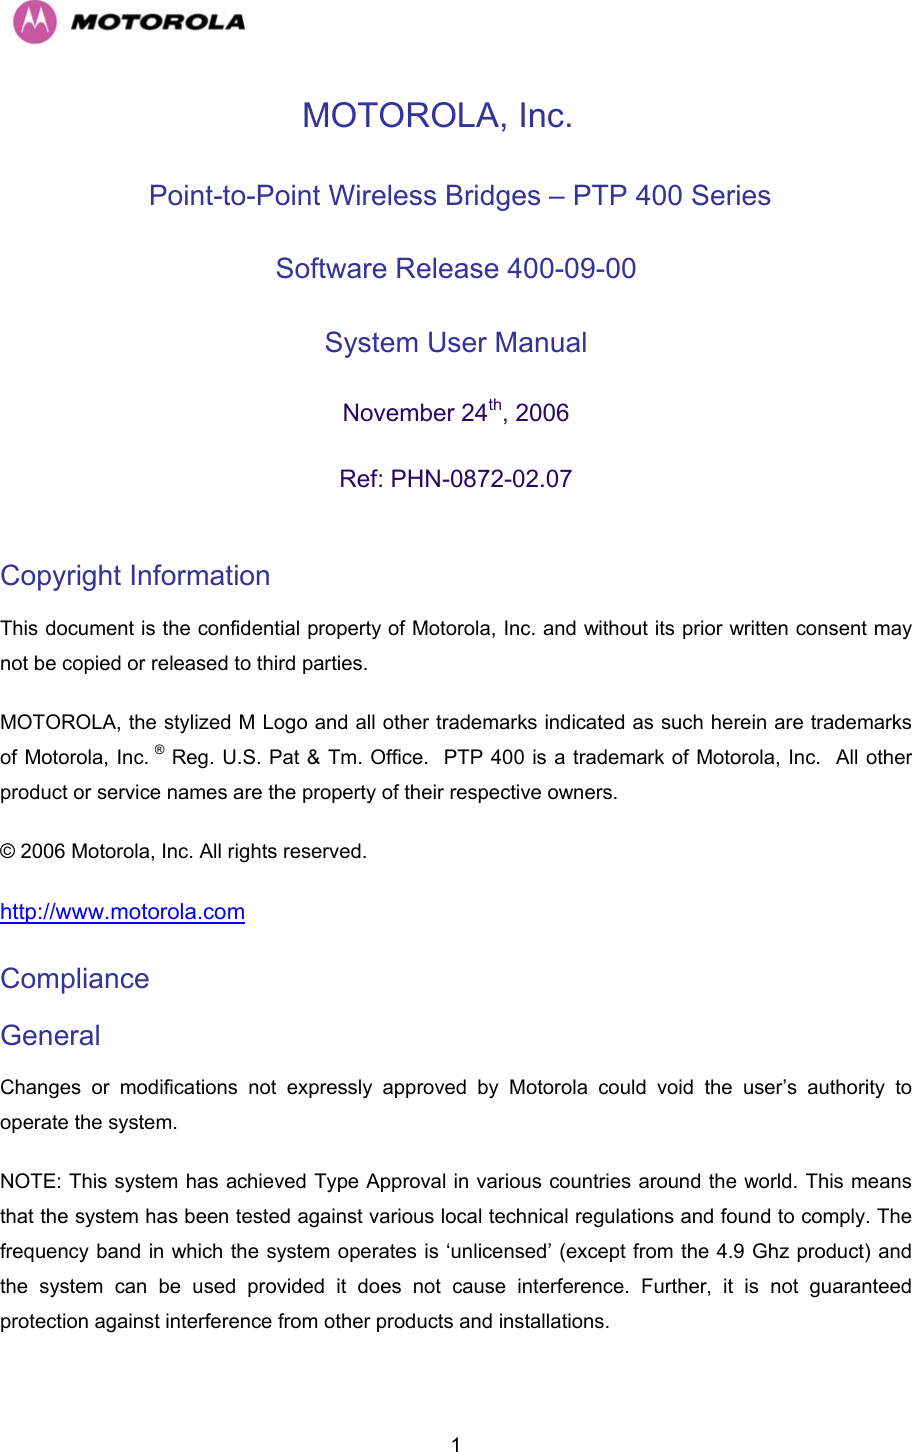   1MOTOROLA, Inc.  Point-to-Point Wireless Bridges – PTP 400 Series Software Release 400-09-00  System User Manual  November 24th, 2006 Ref: PHN-0872-02.07  Copyright Information  This document is the confidential property of Motorola, Inc. and without its prior written consent may not be copied or released to third parties.  MOTOROLA, the stylized M Logo and all other trademarks indicated as such herein are trademarks of Motorola, Inc. ® Reg. U.S. Pat &amp; Tm. Office.  PTP 400 is a trademark of Motorola, Inc.  All other product or service names are the property of their respective owners. © 2006 Motorola, Inc. All rights reserved. http://www.motorola.com Compliance  General Changes or modifications not expressly approved by Motorola could void the user’s authority to operate the system.  NOTE: This system has achieved Type Approval in various countries around the world. This means that the system has been tested against various local technical regulations and found to comply. The frequency band in which the system operates is ‘unlicensed’ (except from the 4.9 Ghz product) and the system can be used provided it does not cause interference. Further, it is not guaranteed protection against interference from other products and installations. 